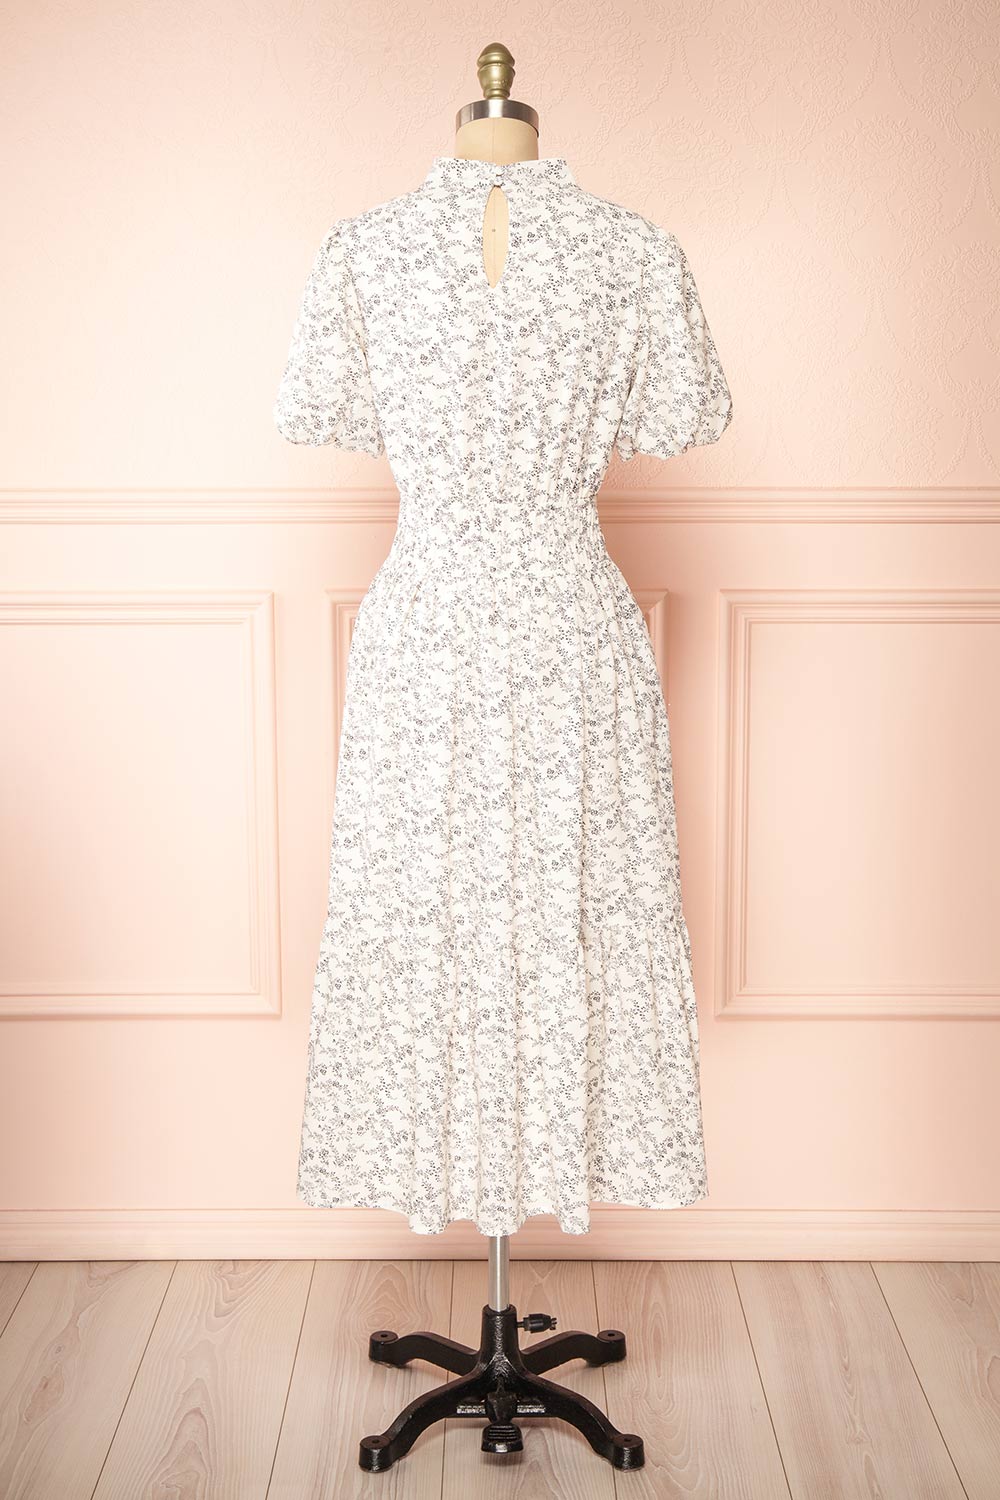 Faybelle White Silky Floral Midi Dress | Boutique 1861 back view